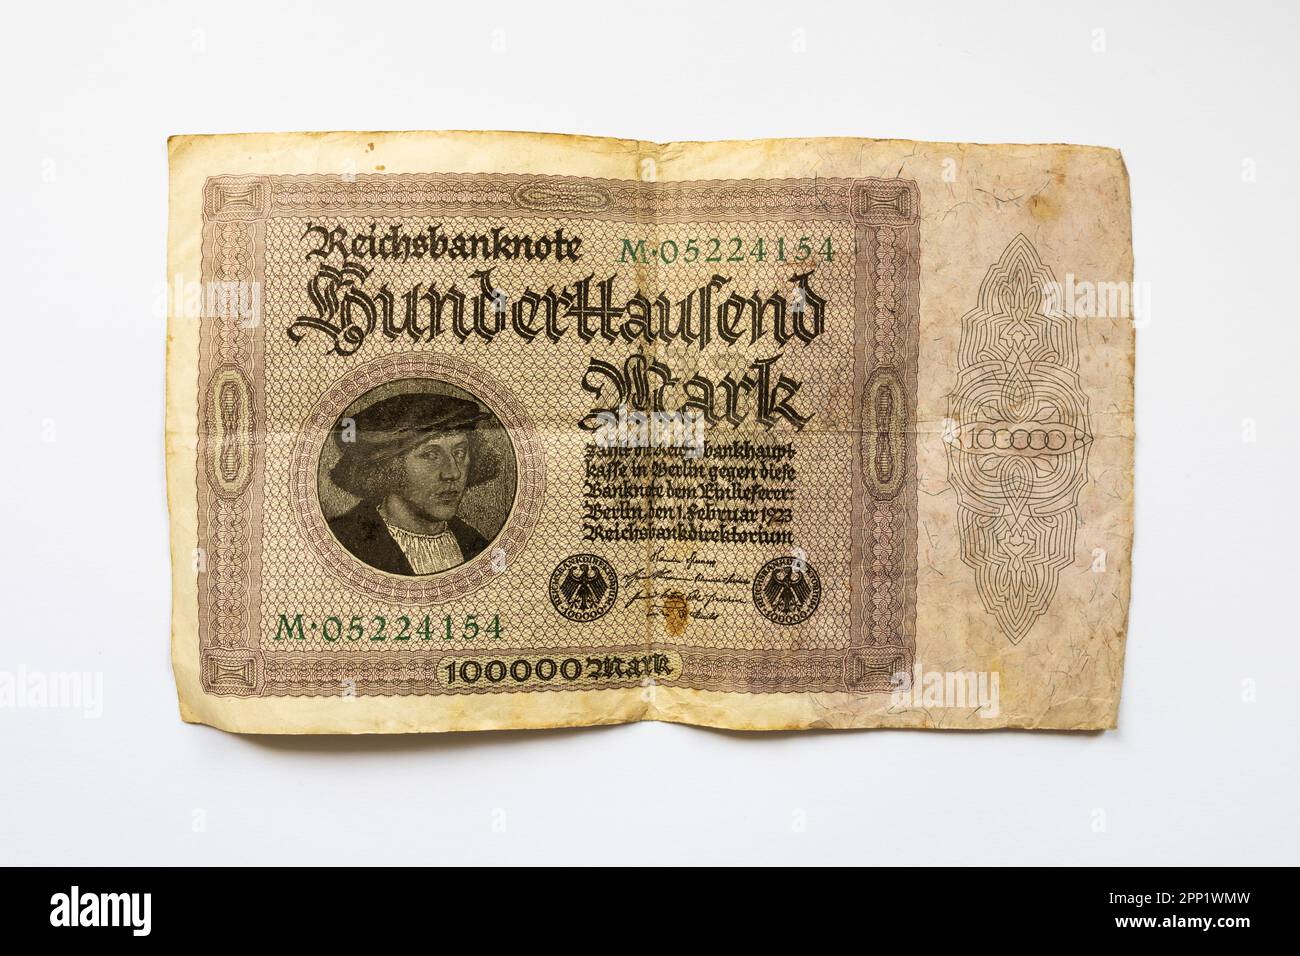 Hunderttausend Mark (one hundred thousand Mark) banknote of the German Reichsbank from 1923. Old money during the hyperinflation in Germany. Stock Photo